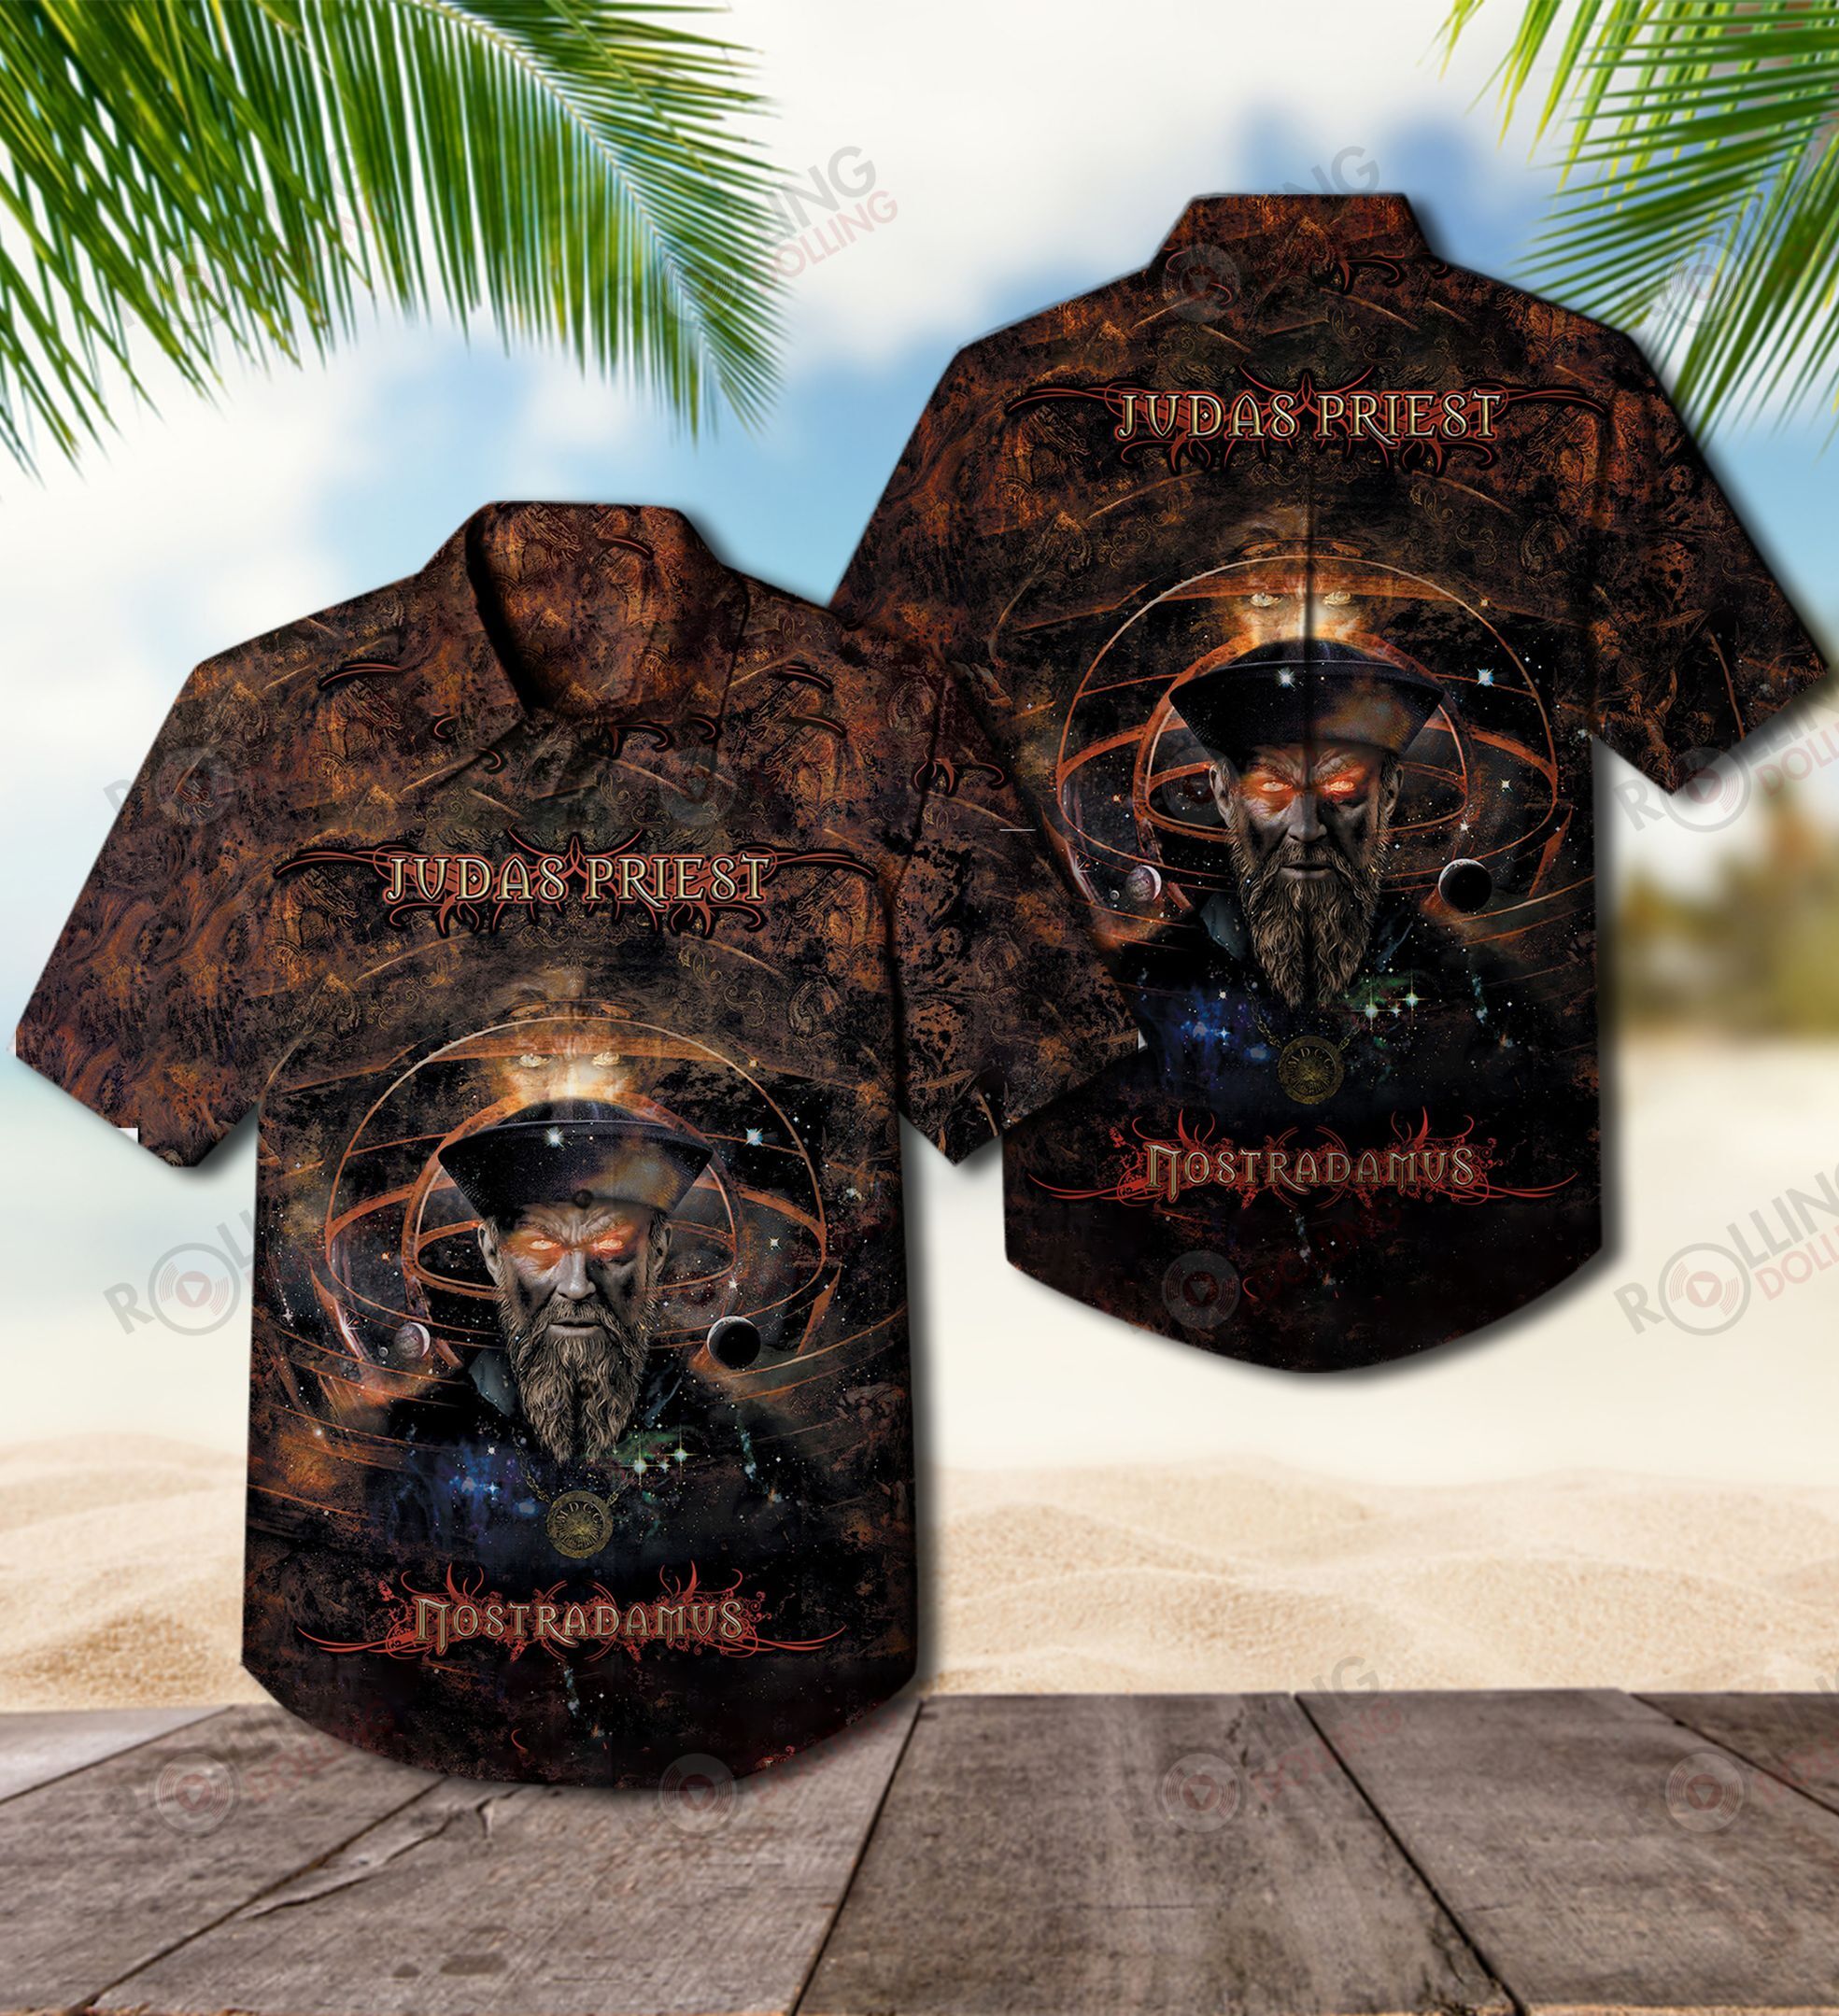 We have compiled a list of some of the best Hawaiian shirt that are available 219